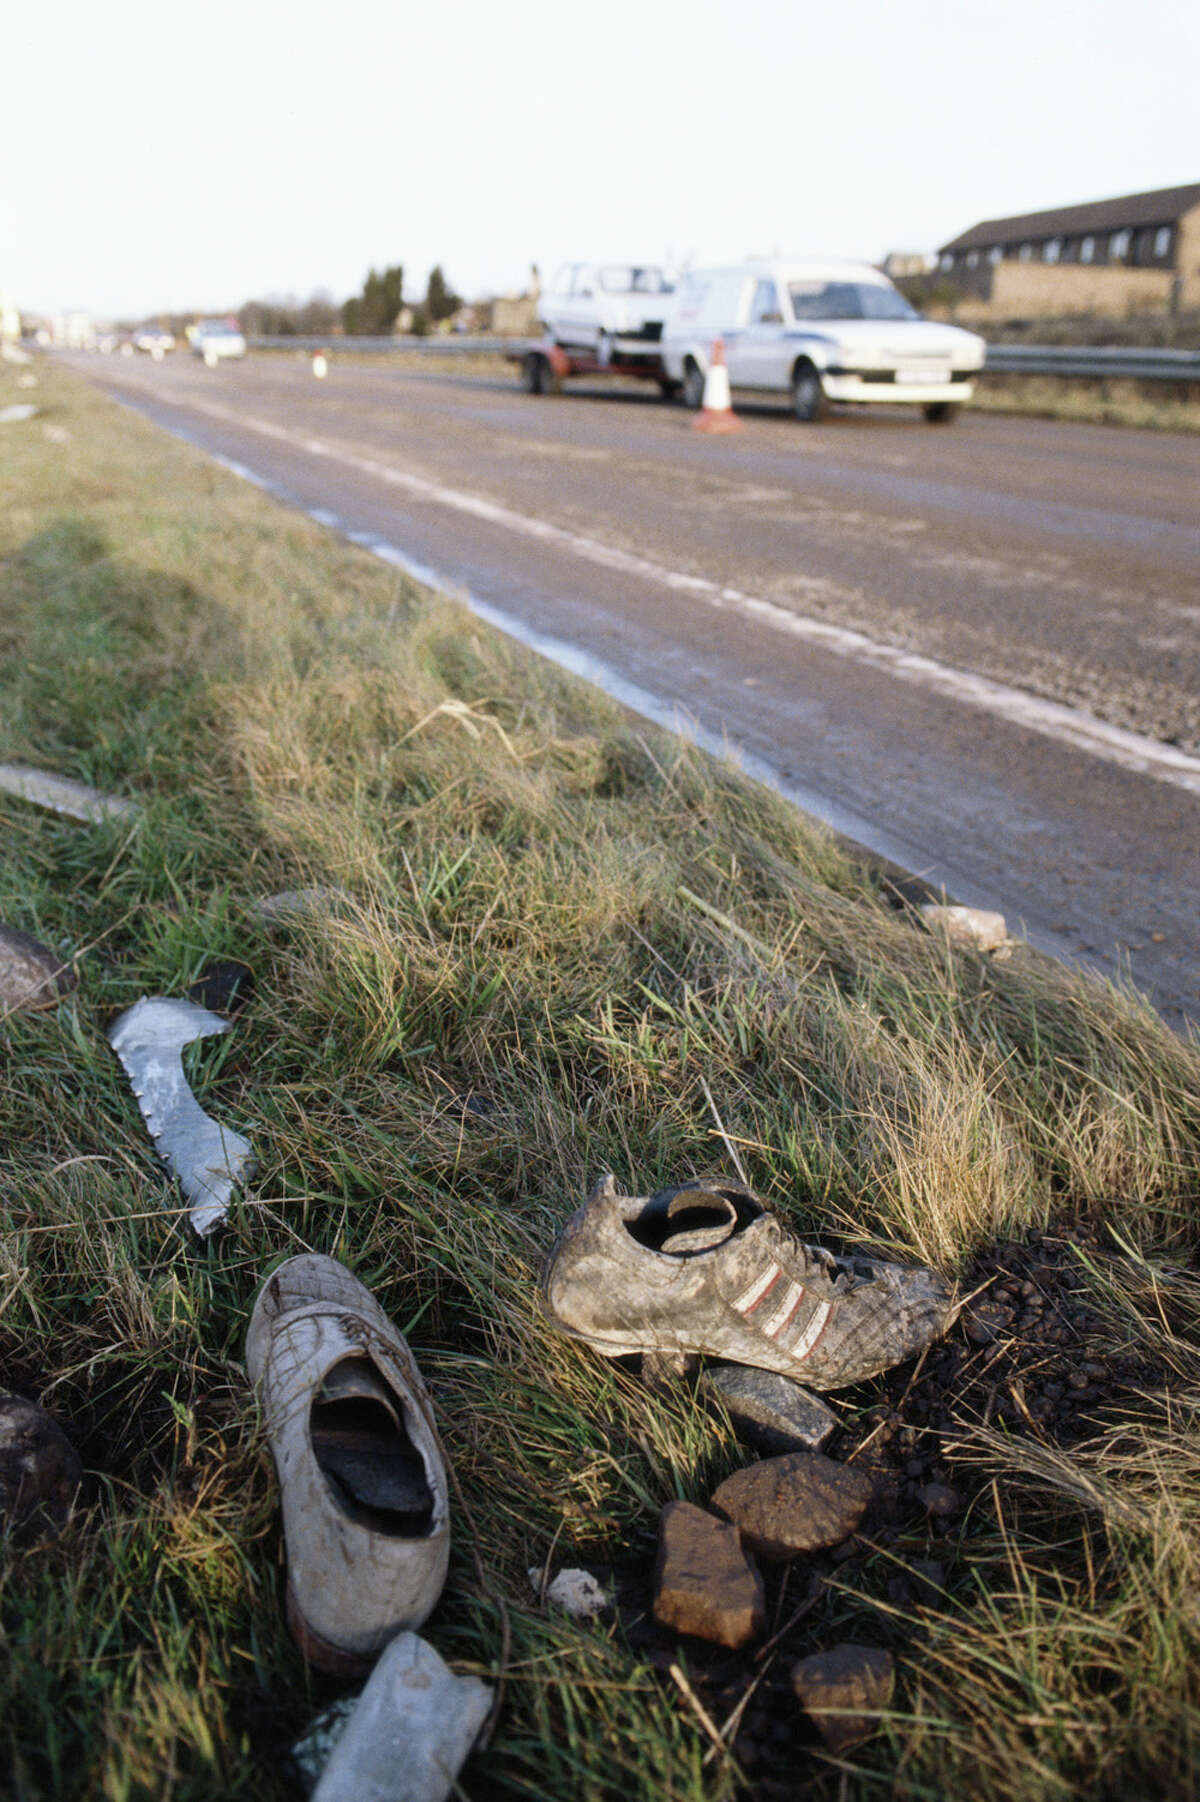 Shoes from the wreckage of Pan Am Flight 103 are seen by a roadside in the town of Lockerbie in Scotland on Dec. 22, 1988.